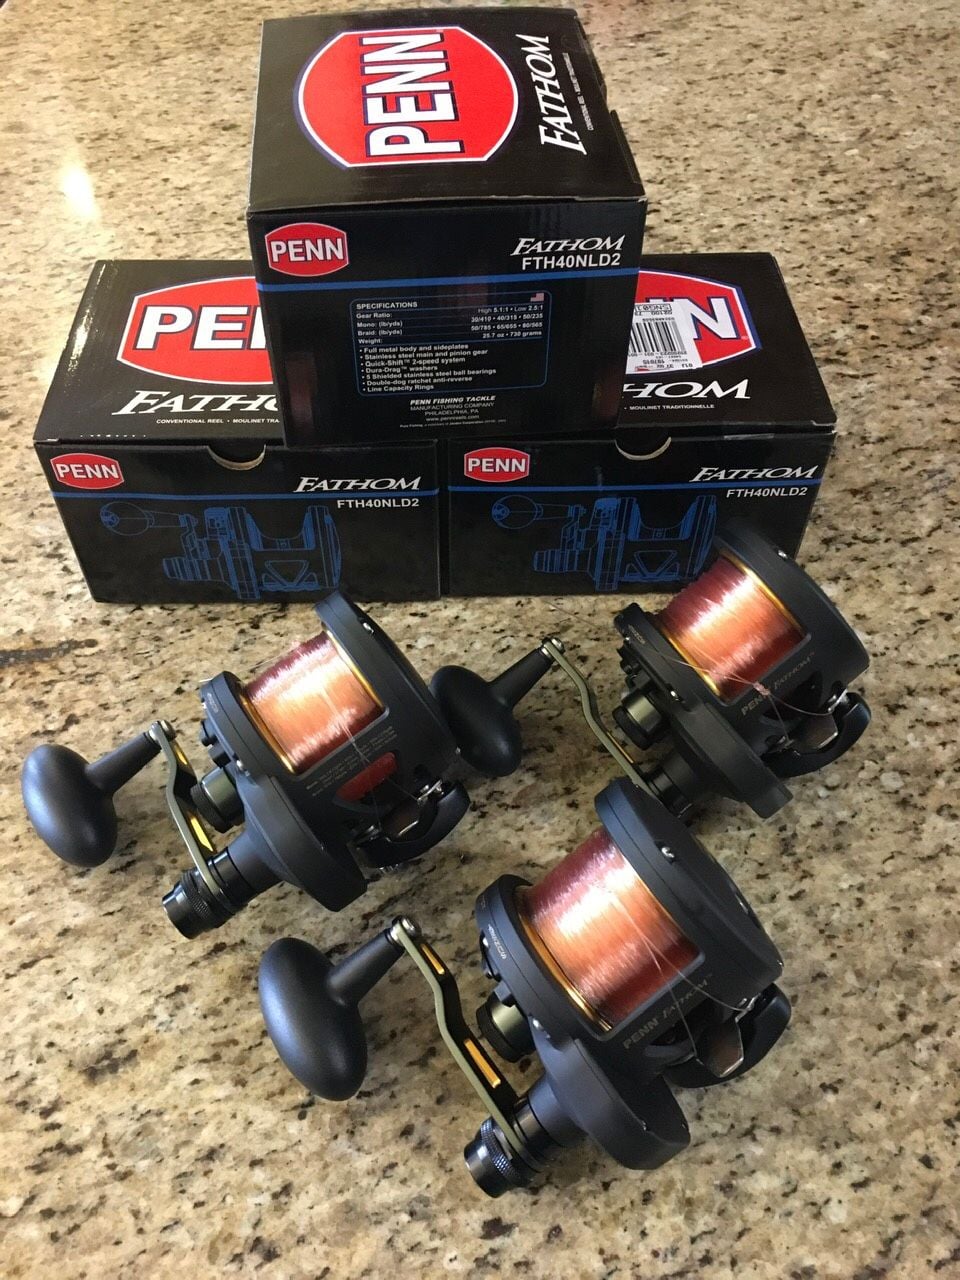 Penn Fathom 40 2-speed reels - The Hull Truth - Boating and Fishing Forum